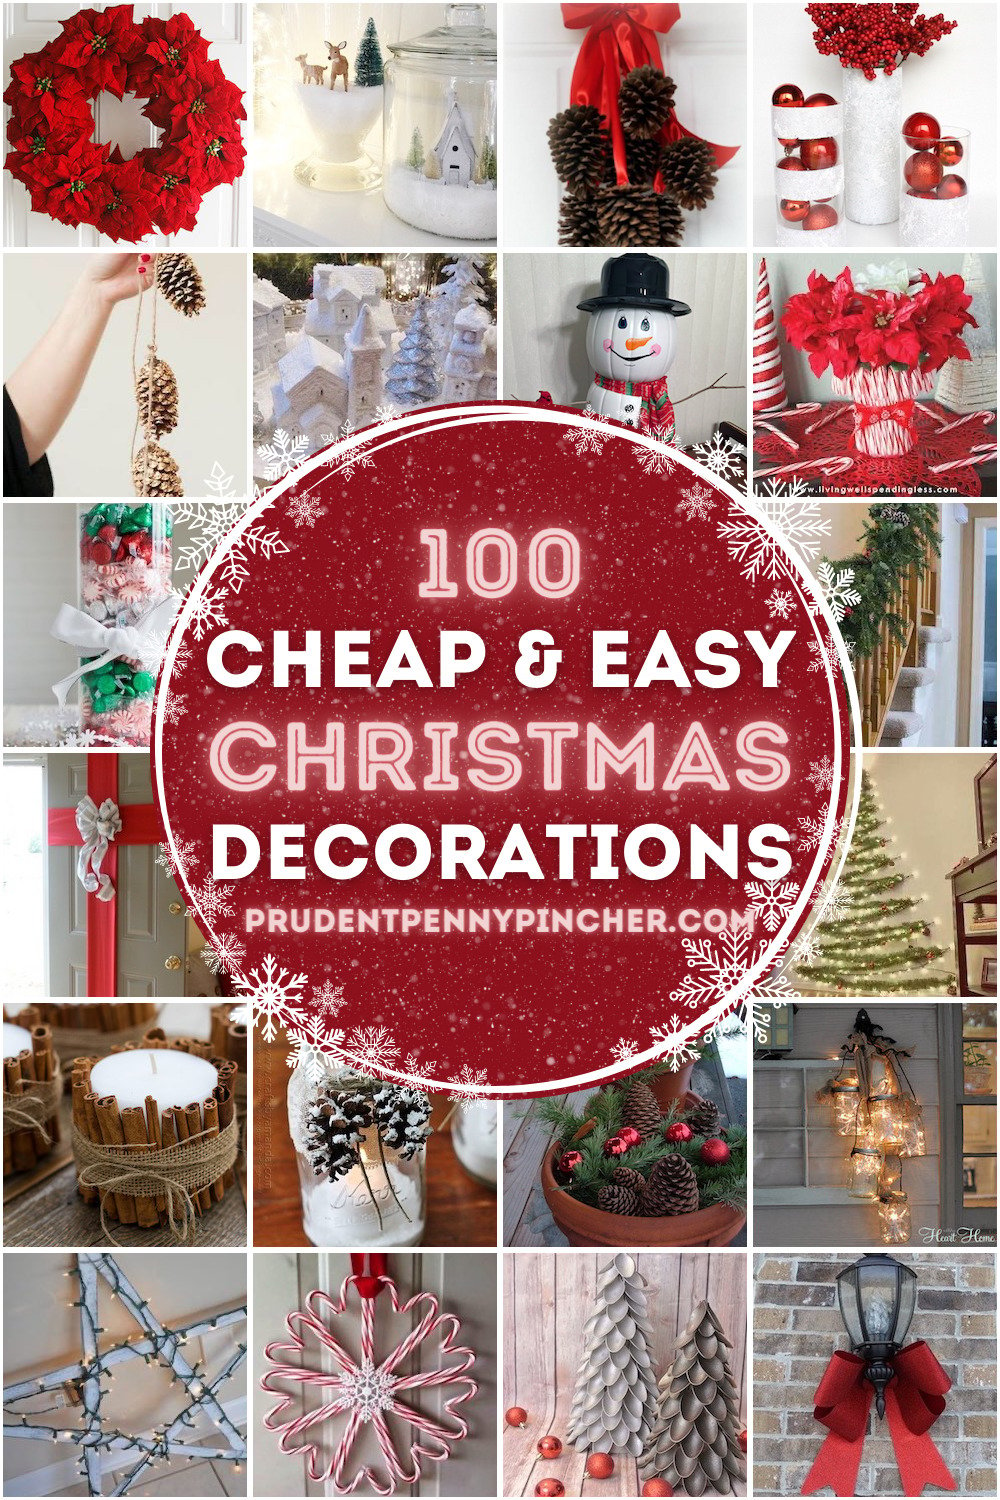 5 Cheap and Easy DIY Christmas Decorations - Prudent Penny Pincher